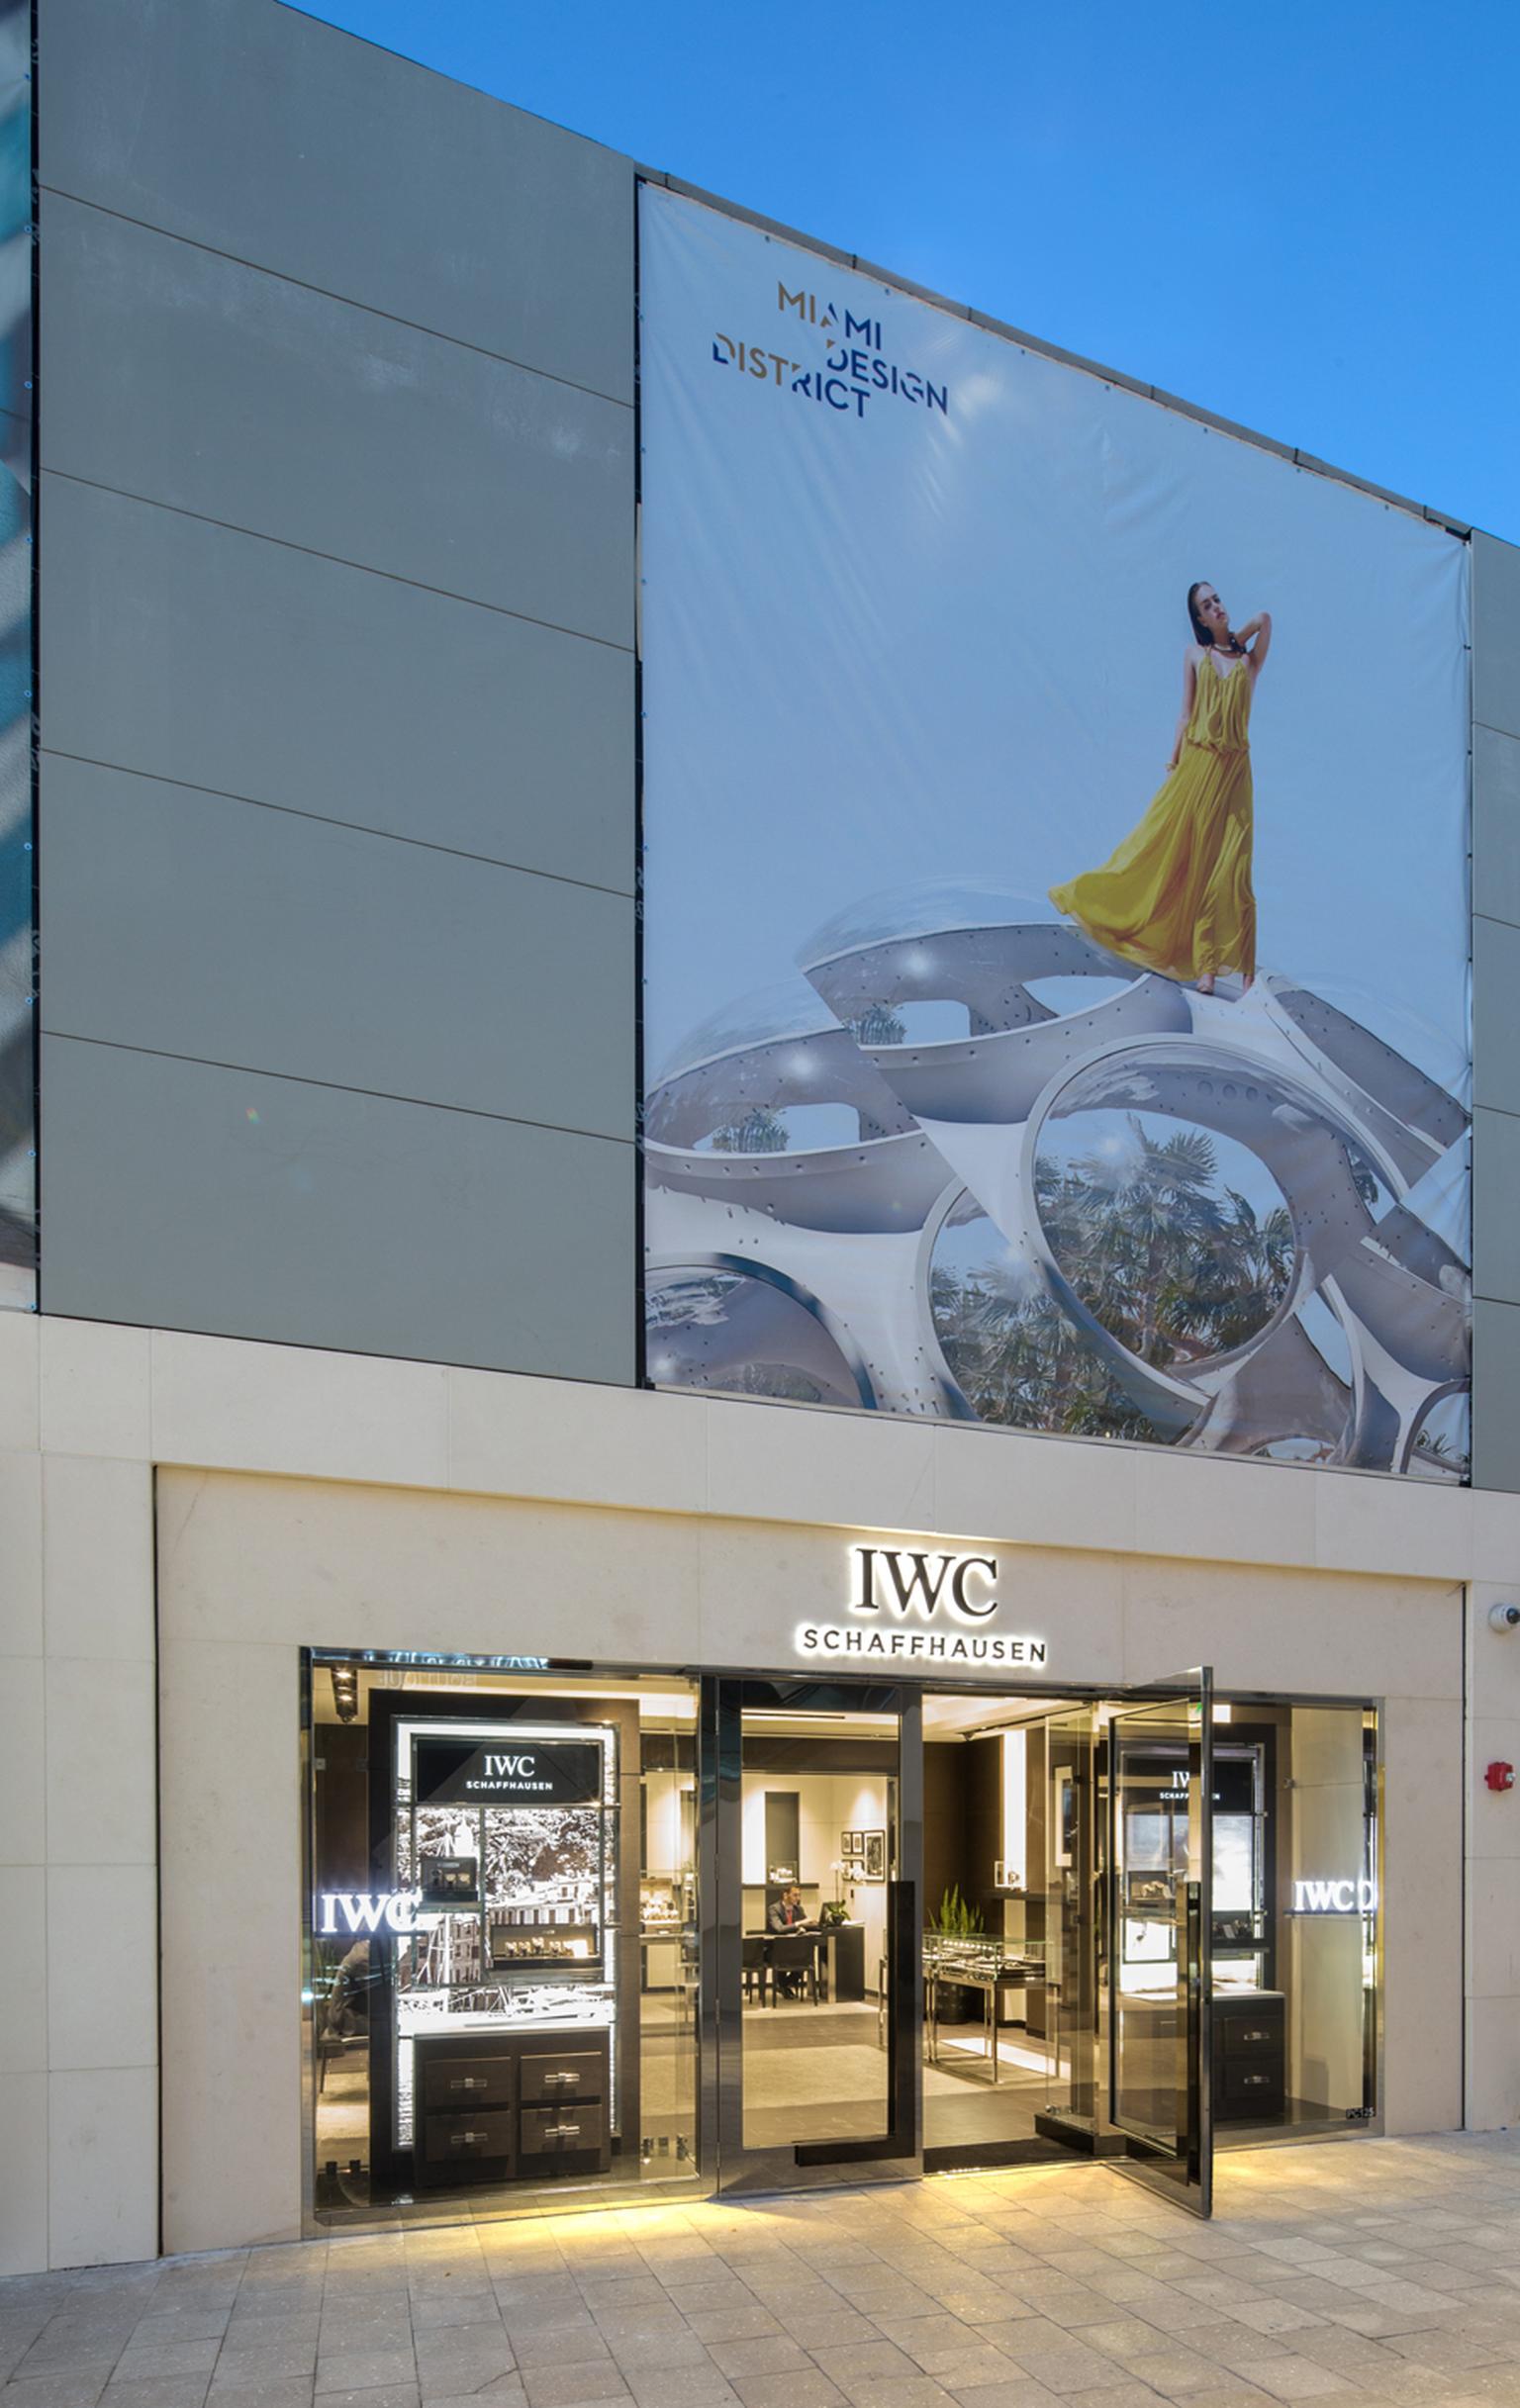 Luxury Swiss watchmaker IWC boutique in the Miami Design District.